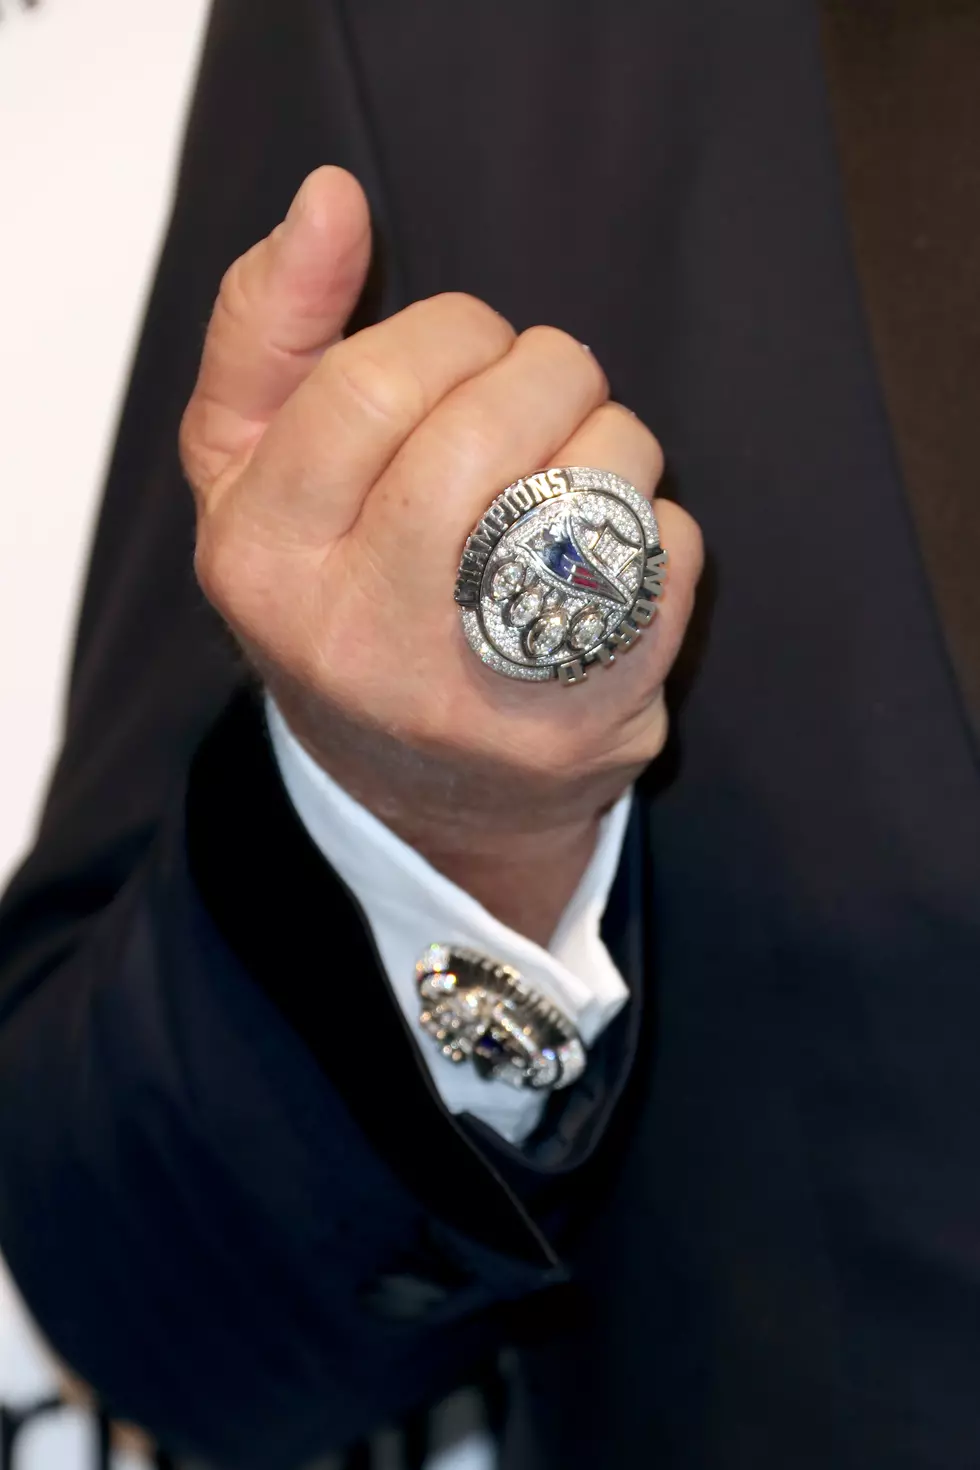 Sacked! Man Jailed for Selling Fake Patriots Super Bowl Rings